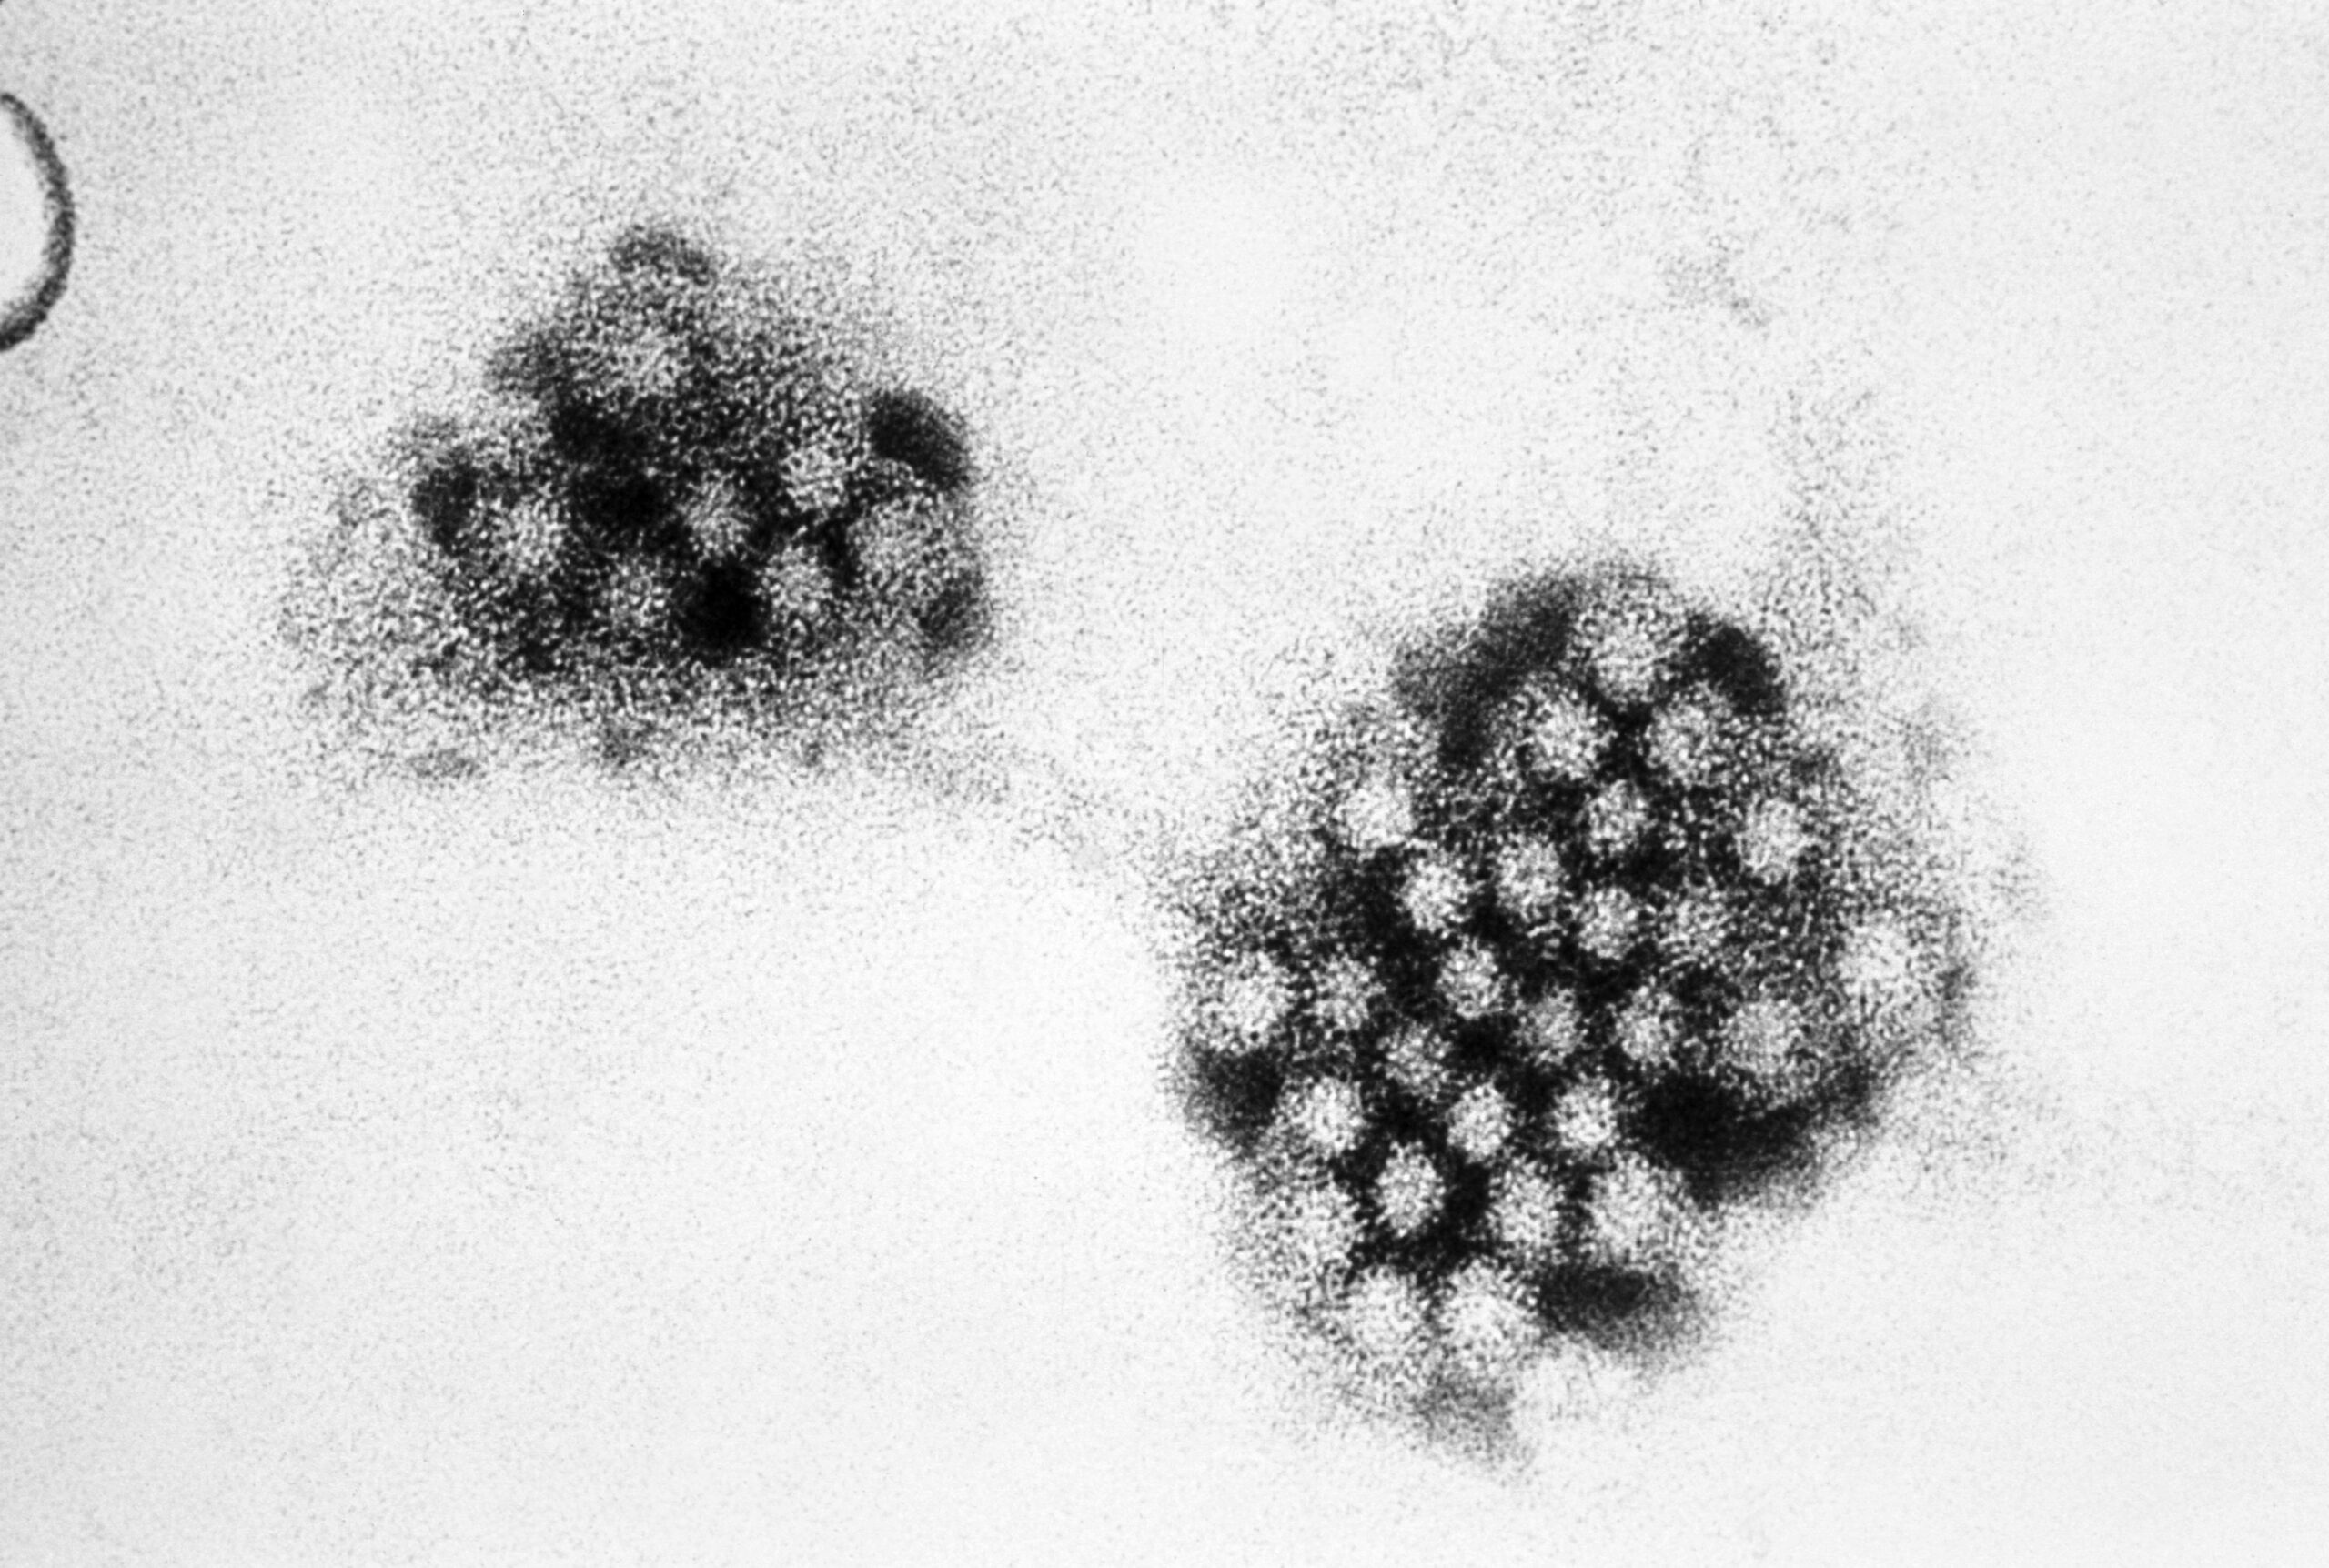 Norovirus: Get to know the disease that hit southern Brazil